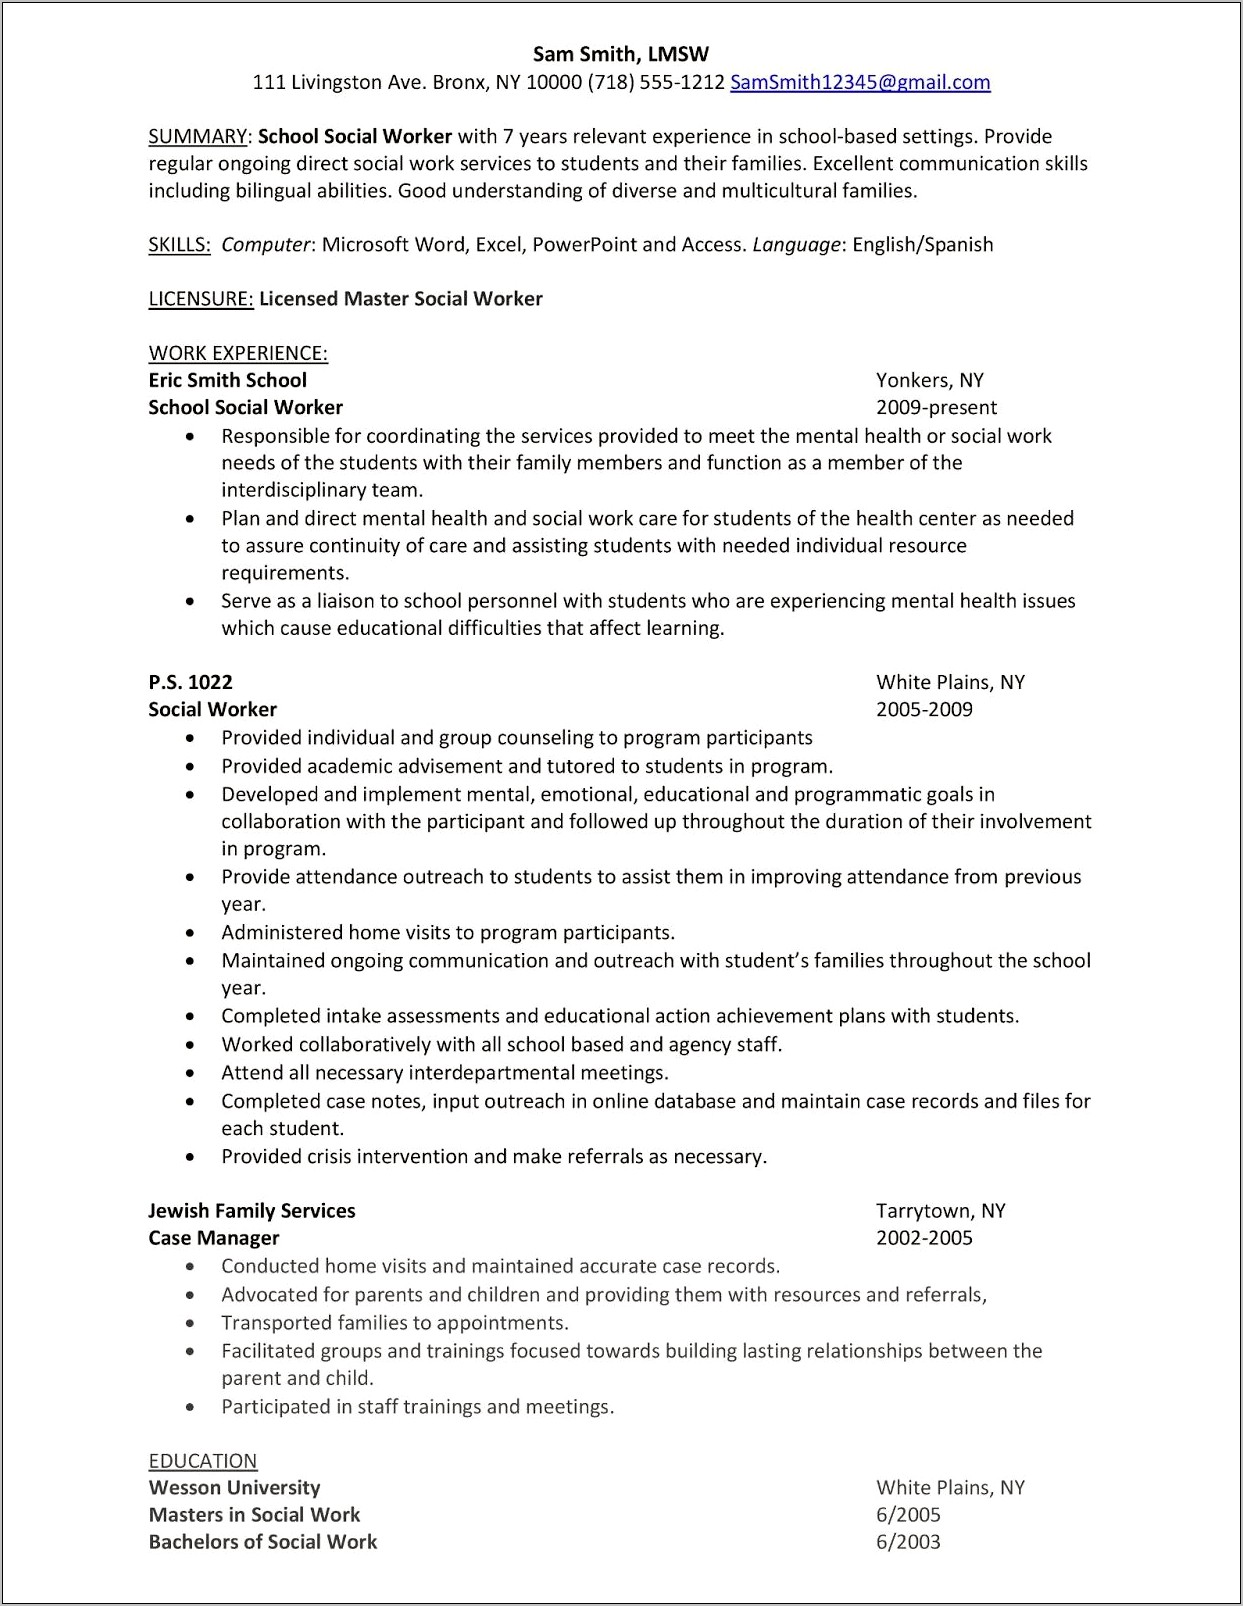 Resume Skills For Social Workers